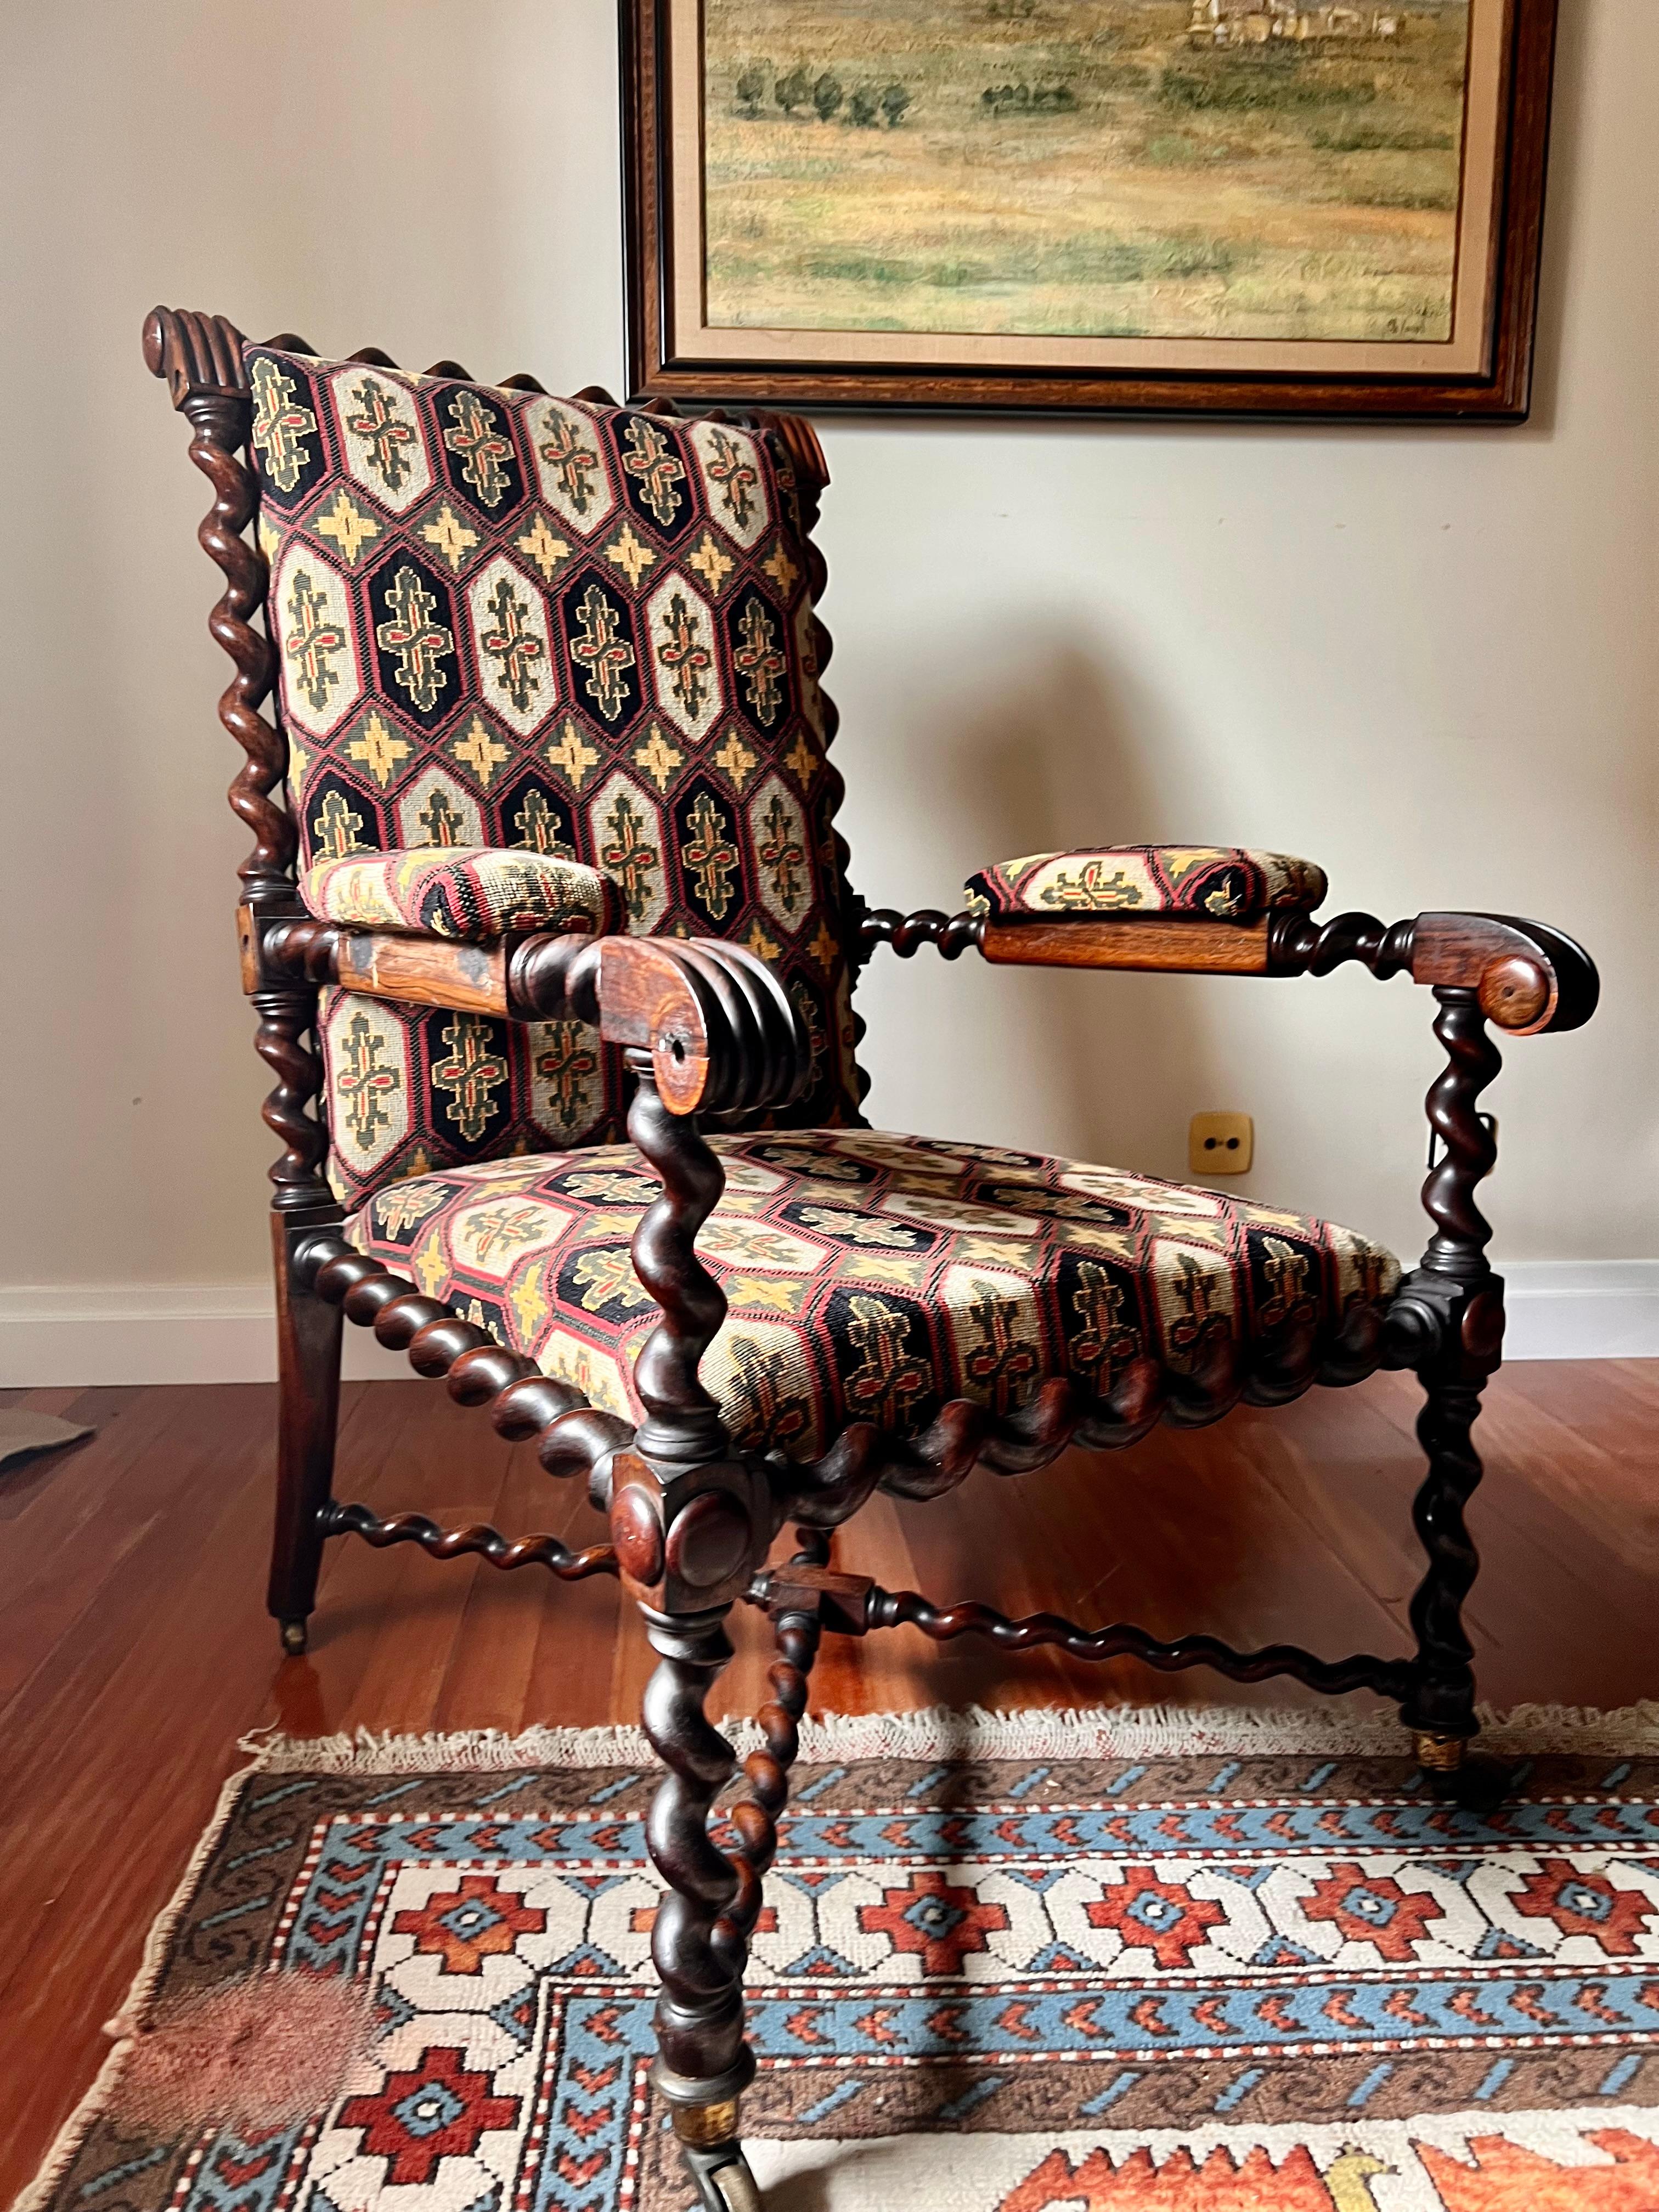 The design and ornamentation of this centre chair is characteristic of Portuguese Baroque furniture dating from the second half of the 18th century. Made from Brazilian rosewood imported from Portugal’s great colony, incorporating tremidos in the